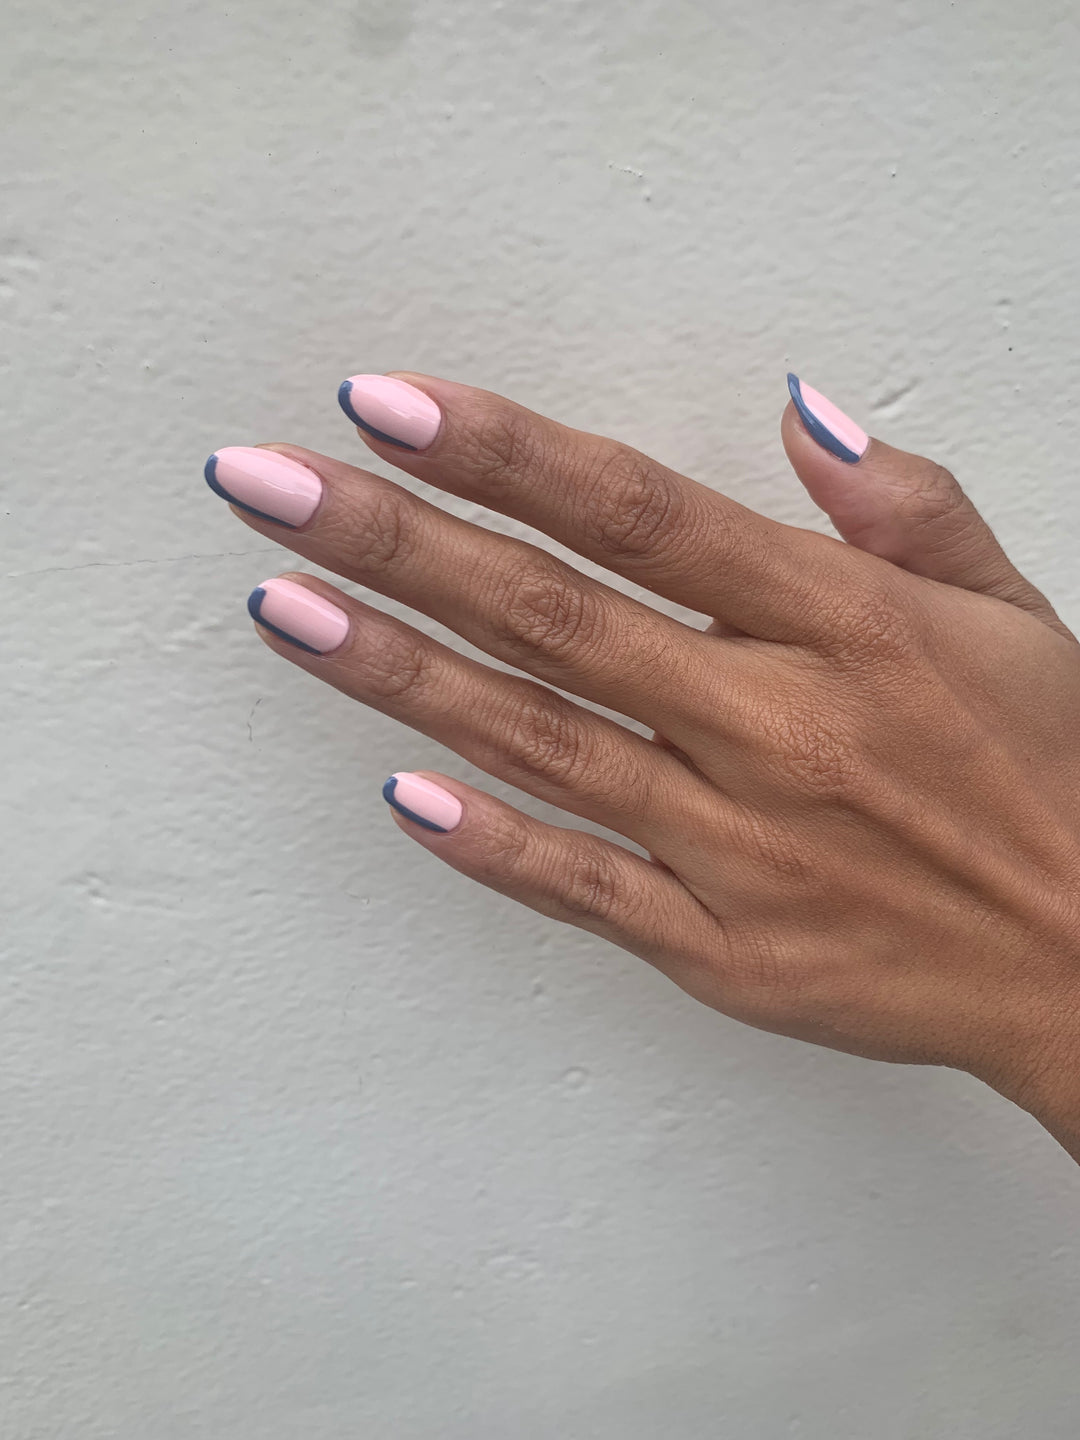 The 2021 Nail Trends to Take Inspo From